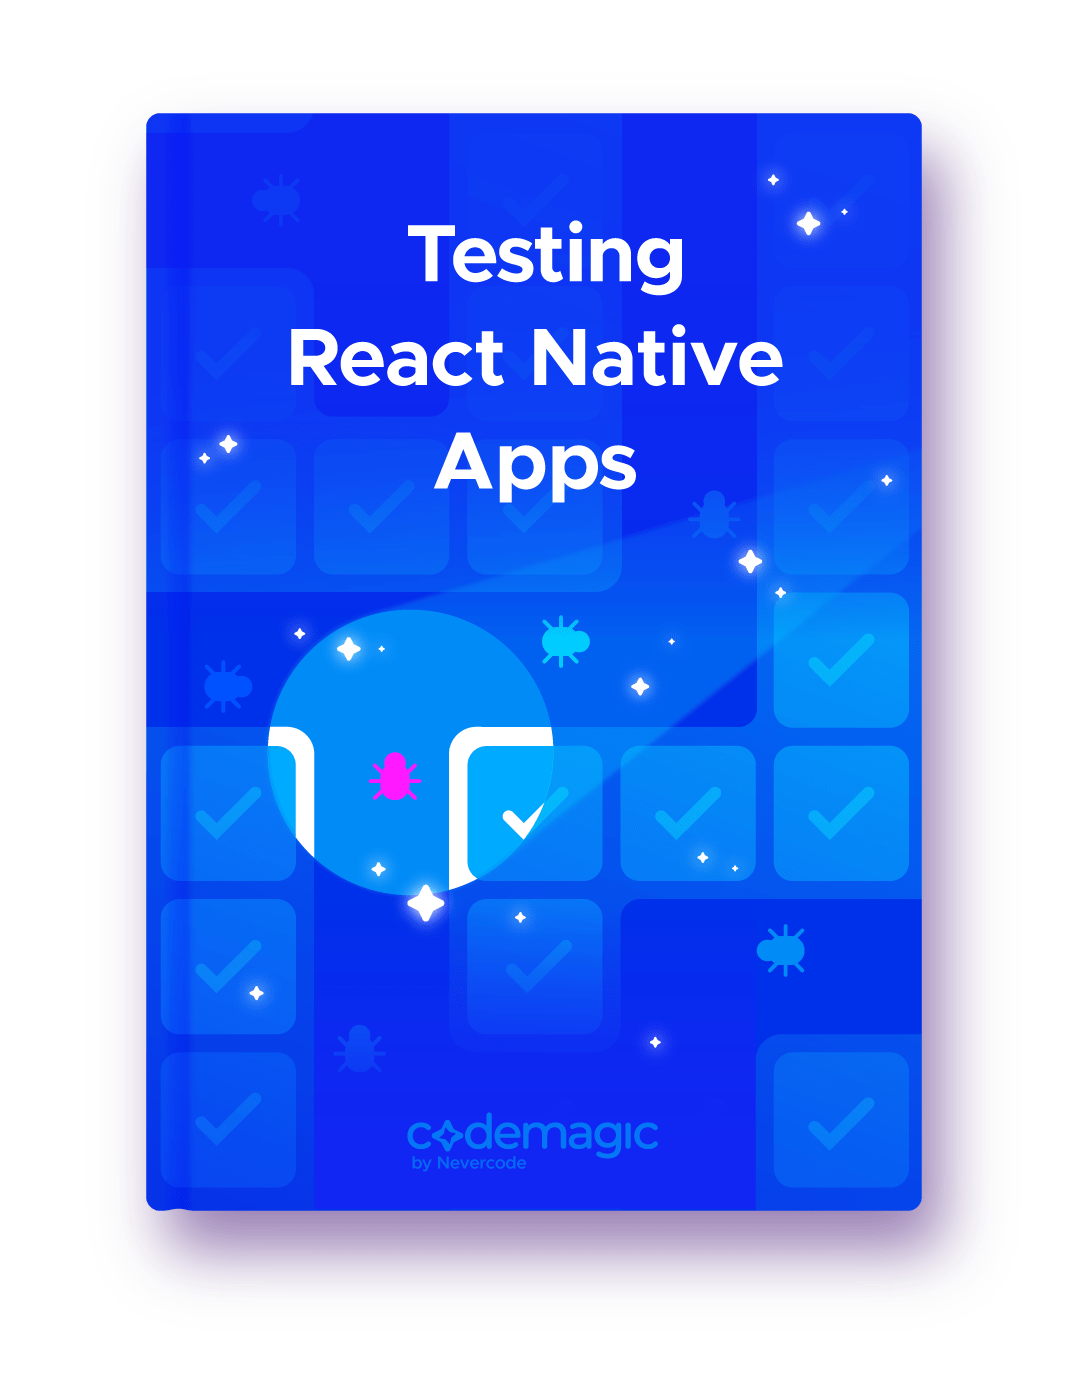 codemagic ebook testing react native apps cover